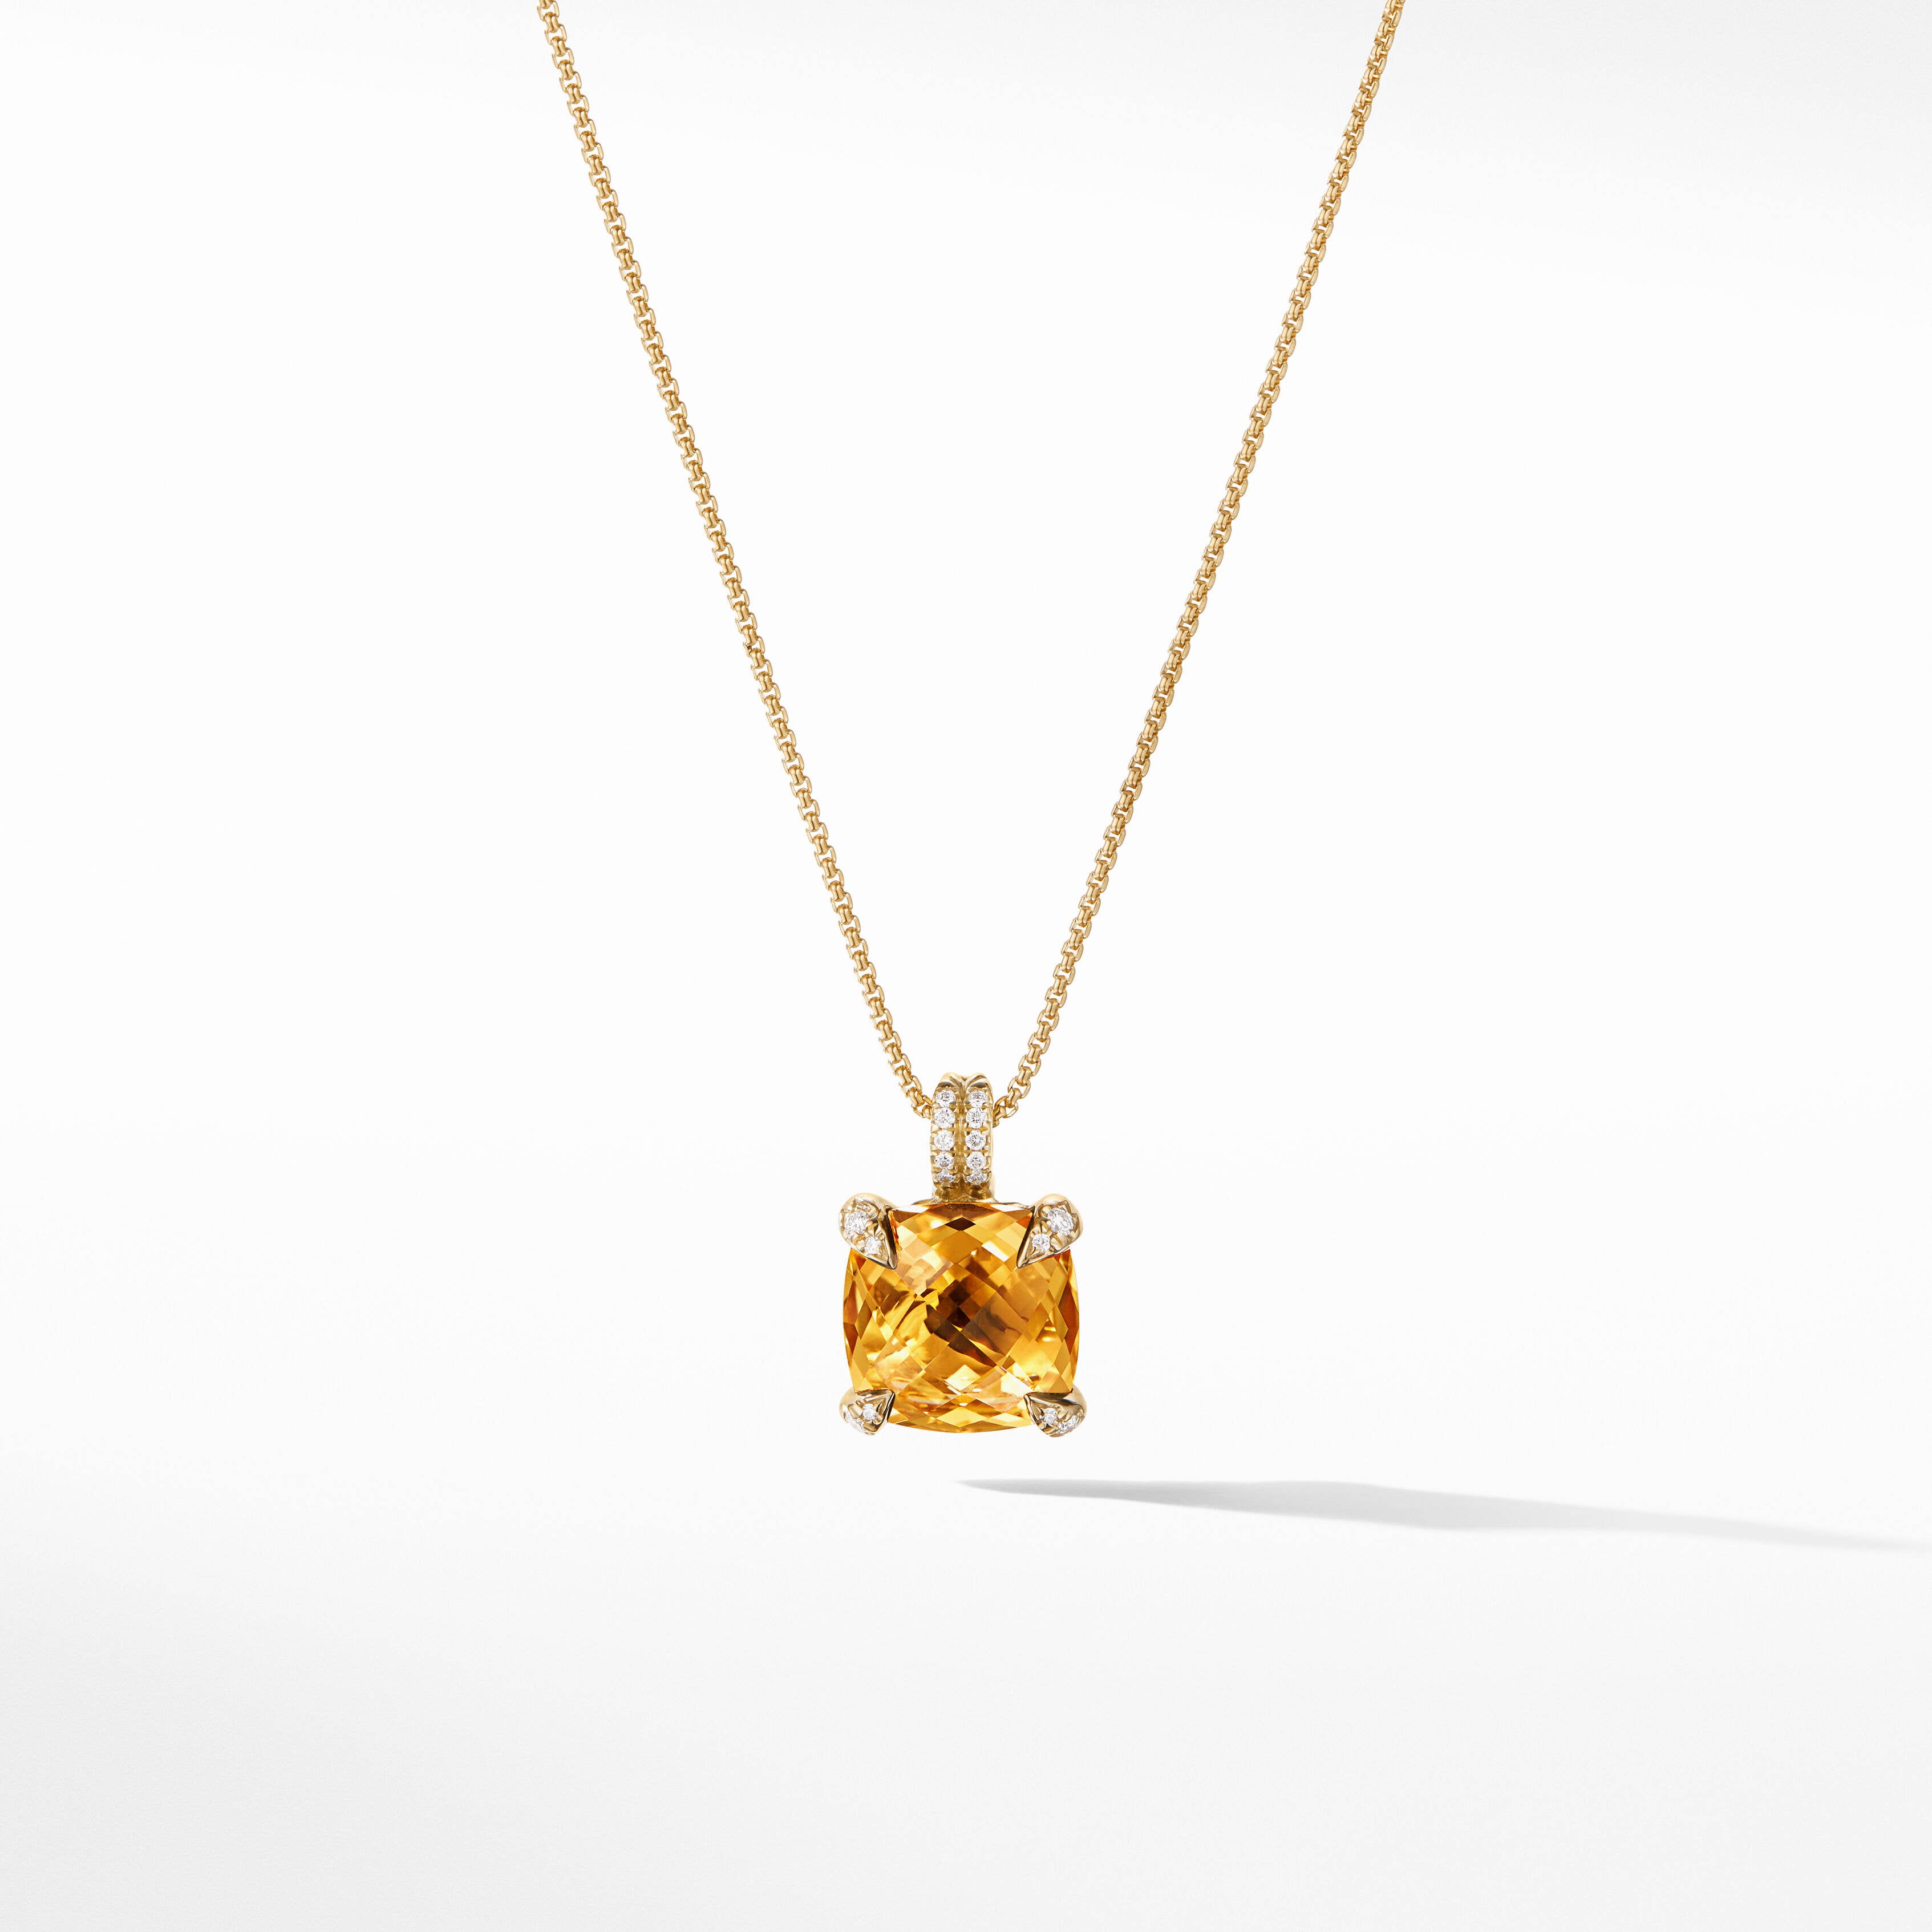 Chatelaine® Pendant Necklace in 18K Yellow Gold with Citrine and Pavé Diamonds